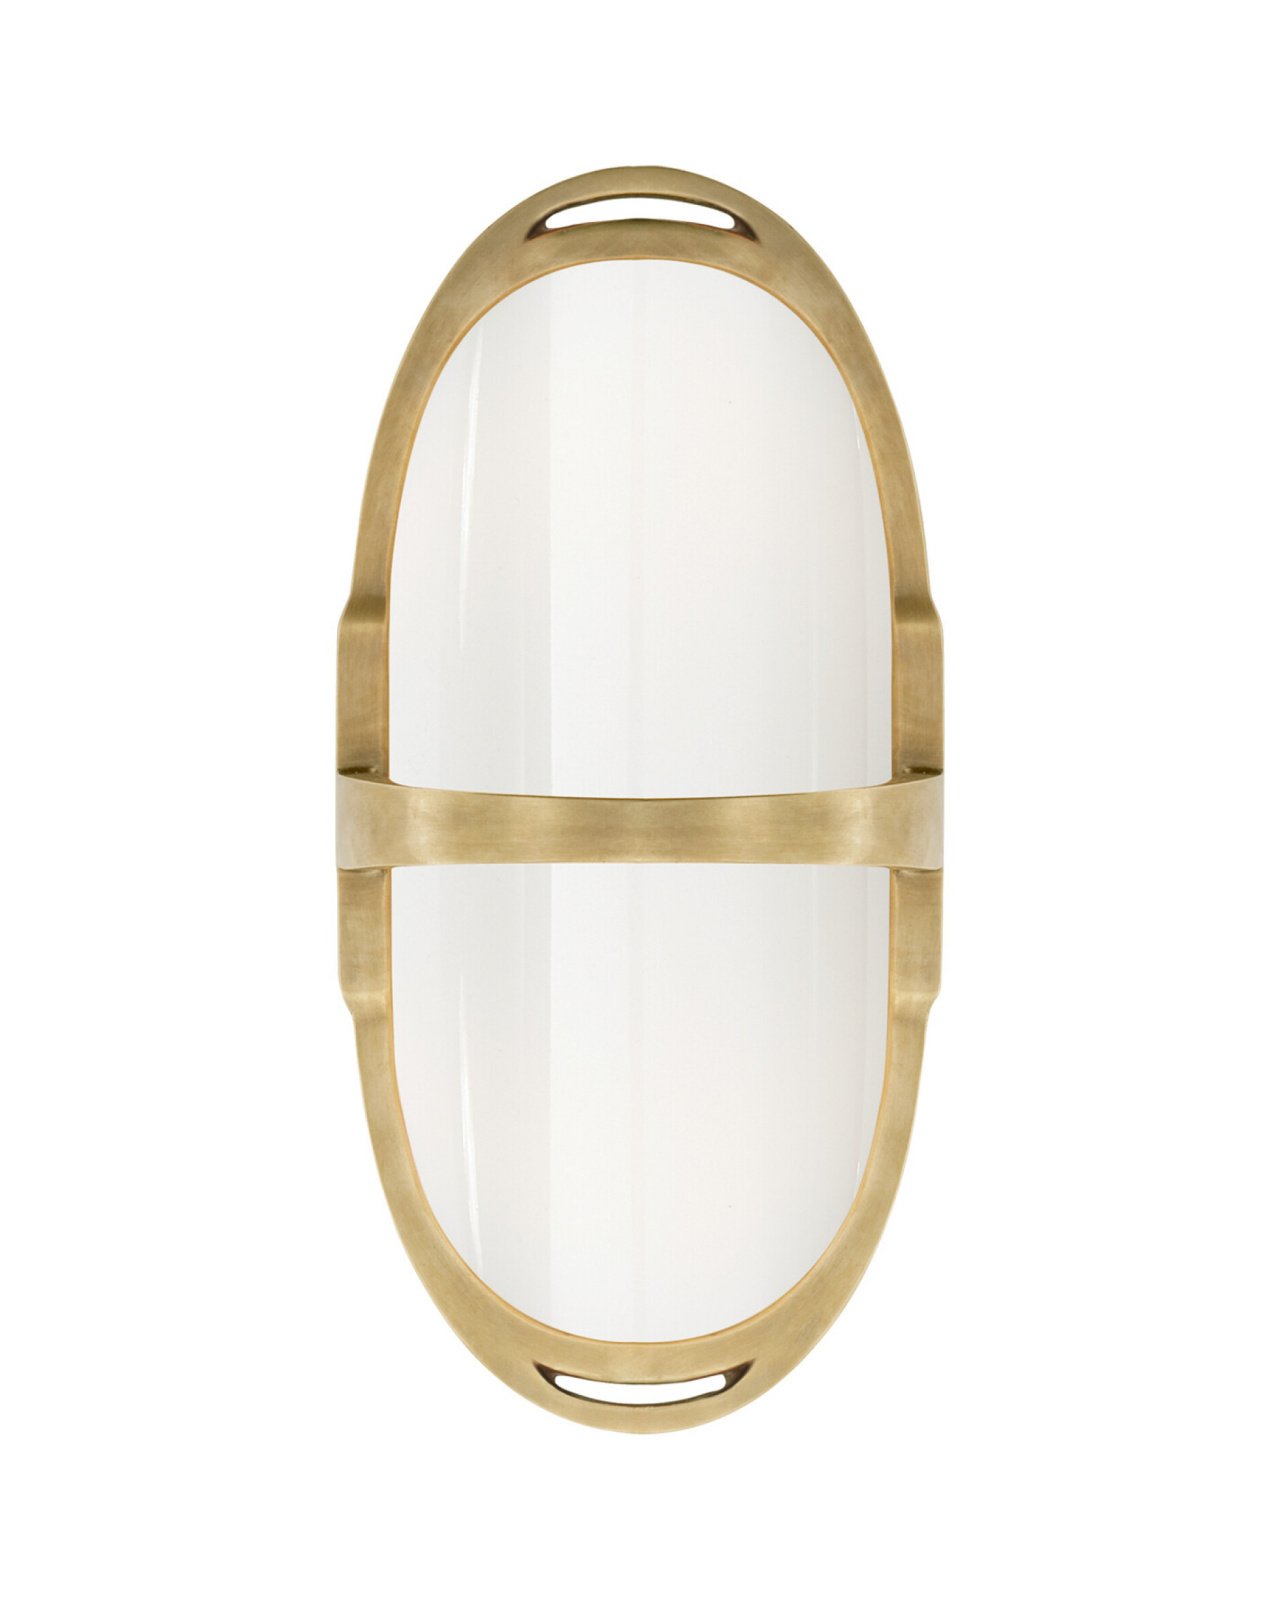 Westbury Double Sconce Natural Brass